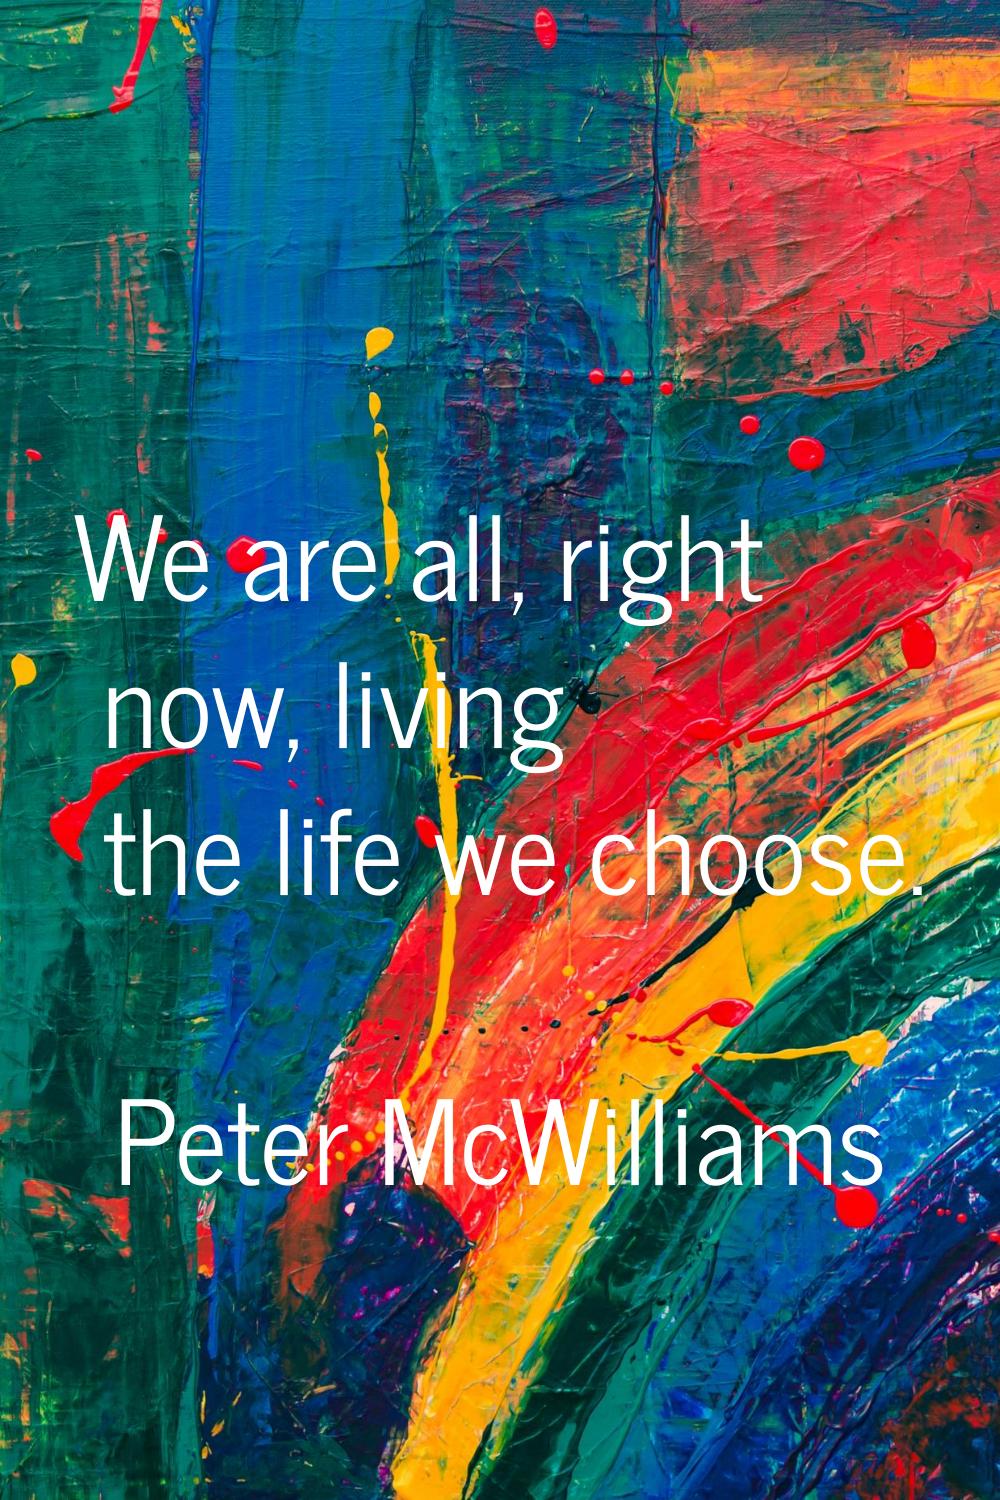 We are all, right now, living the life we choose.